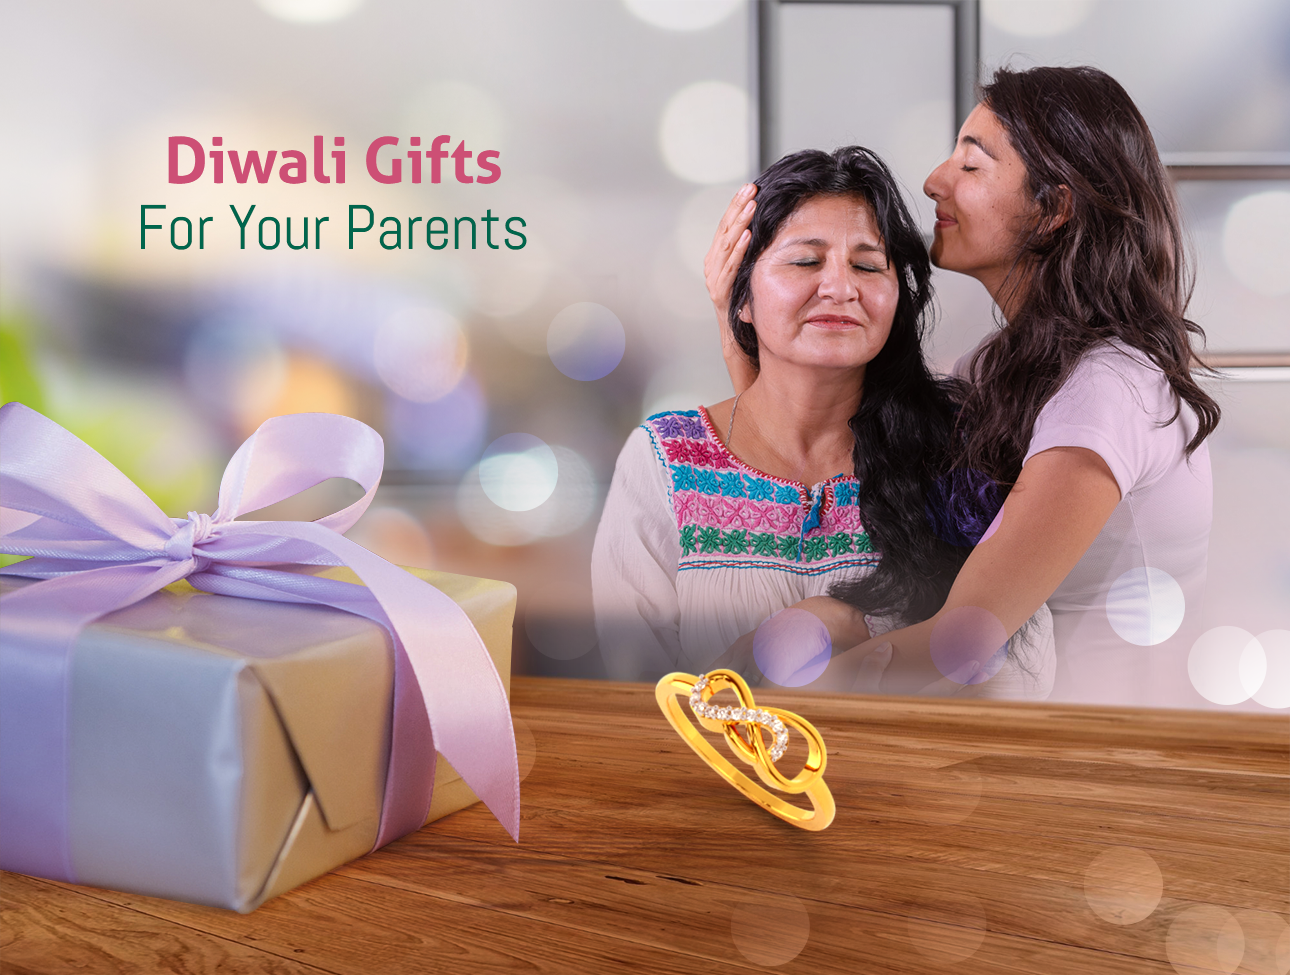 Express Your Love with Hindu New Year Gifts for Parents